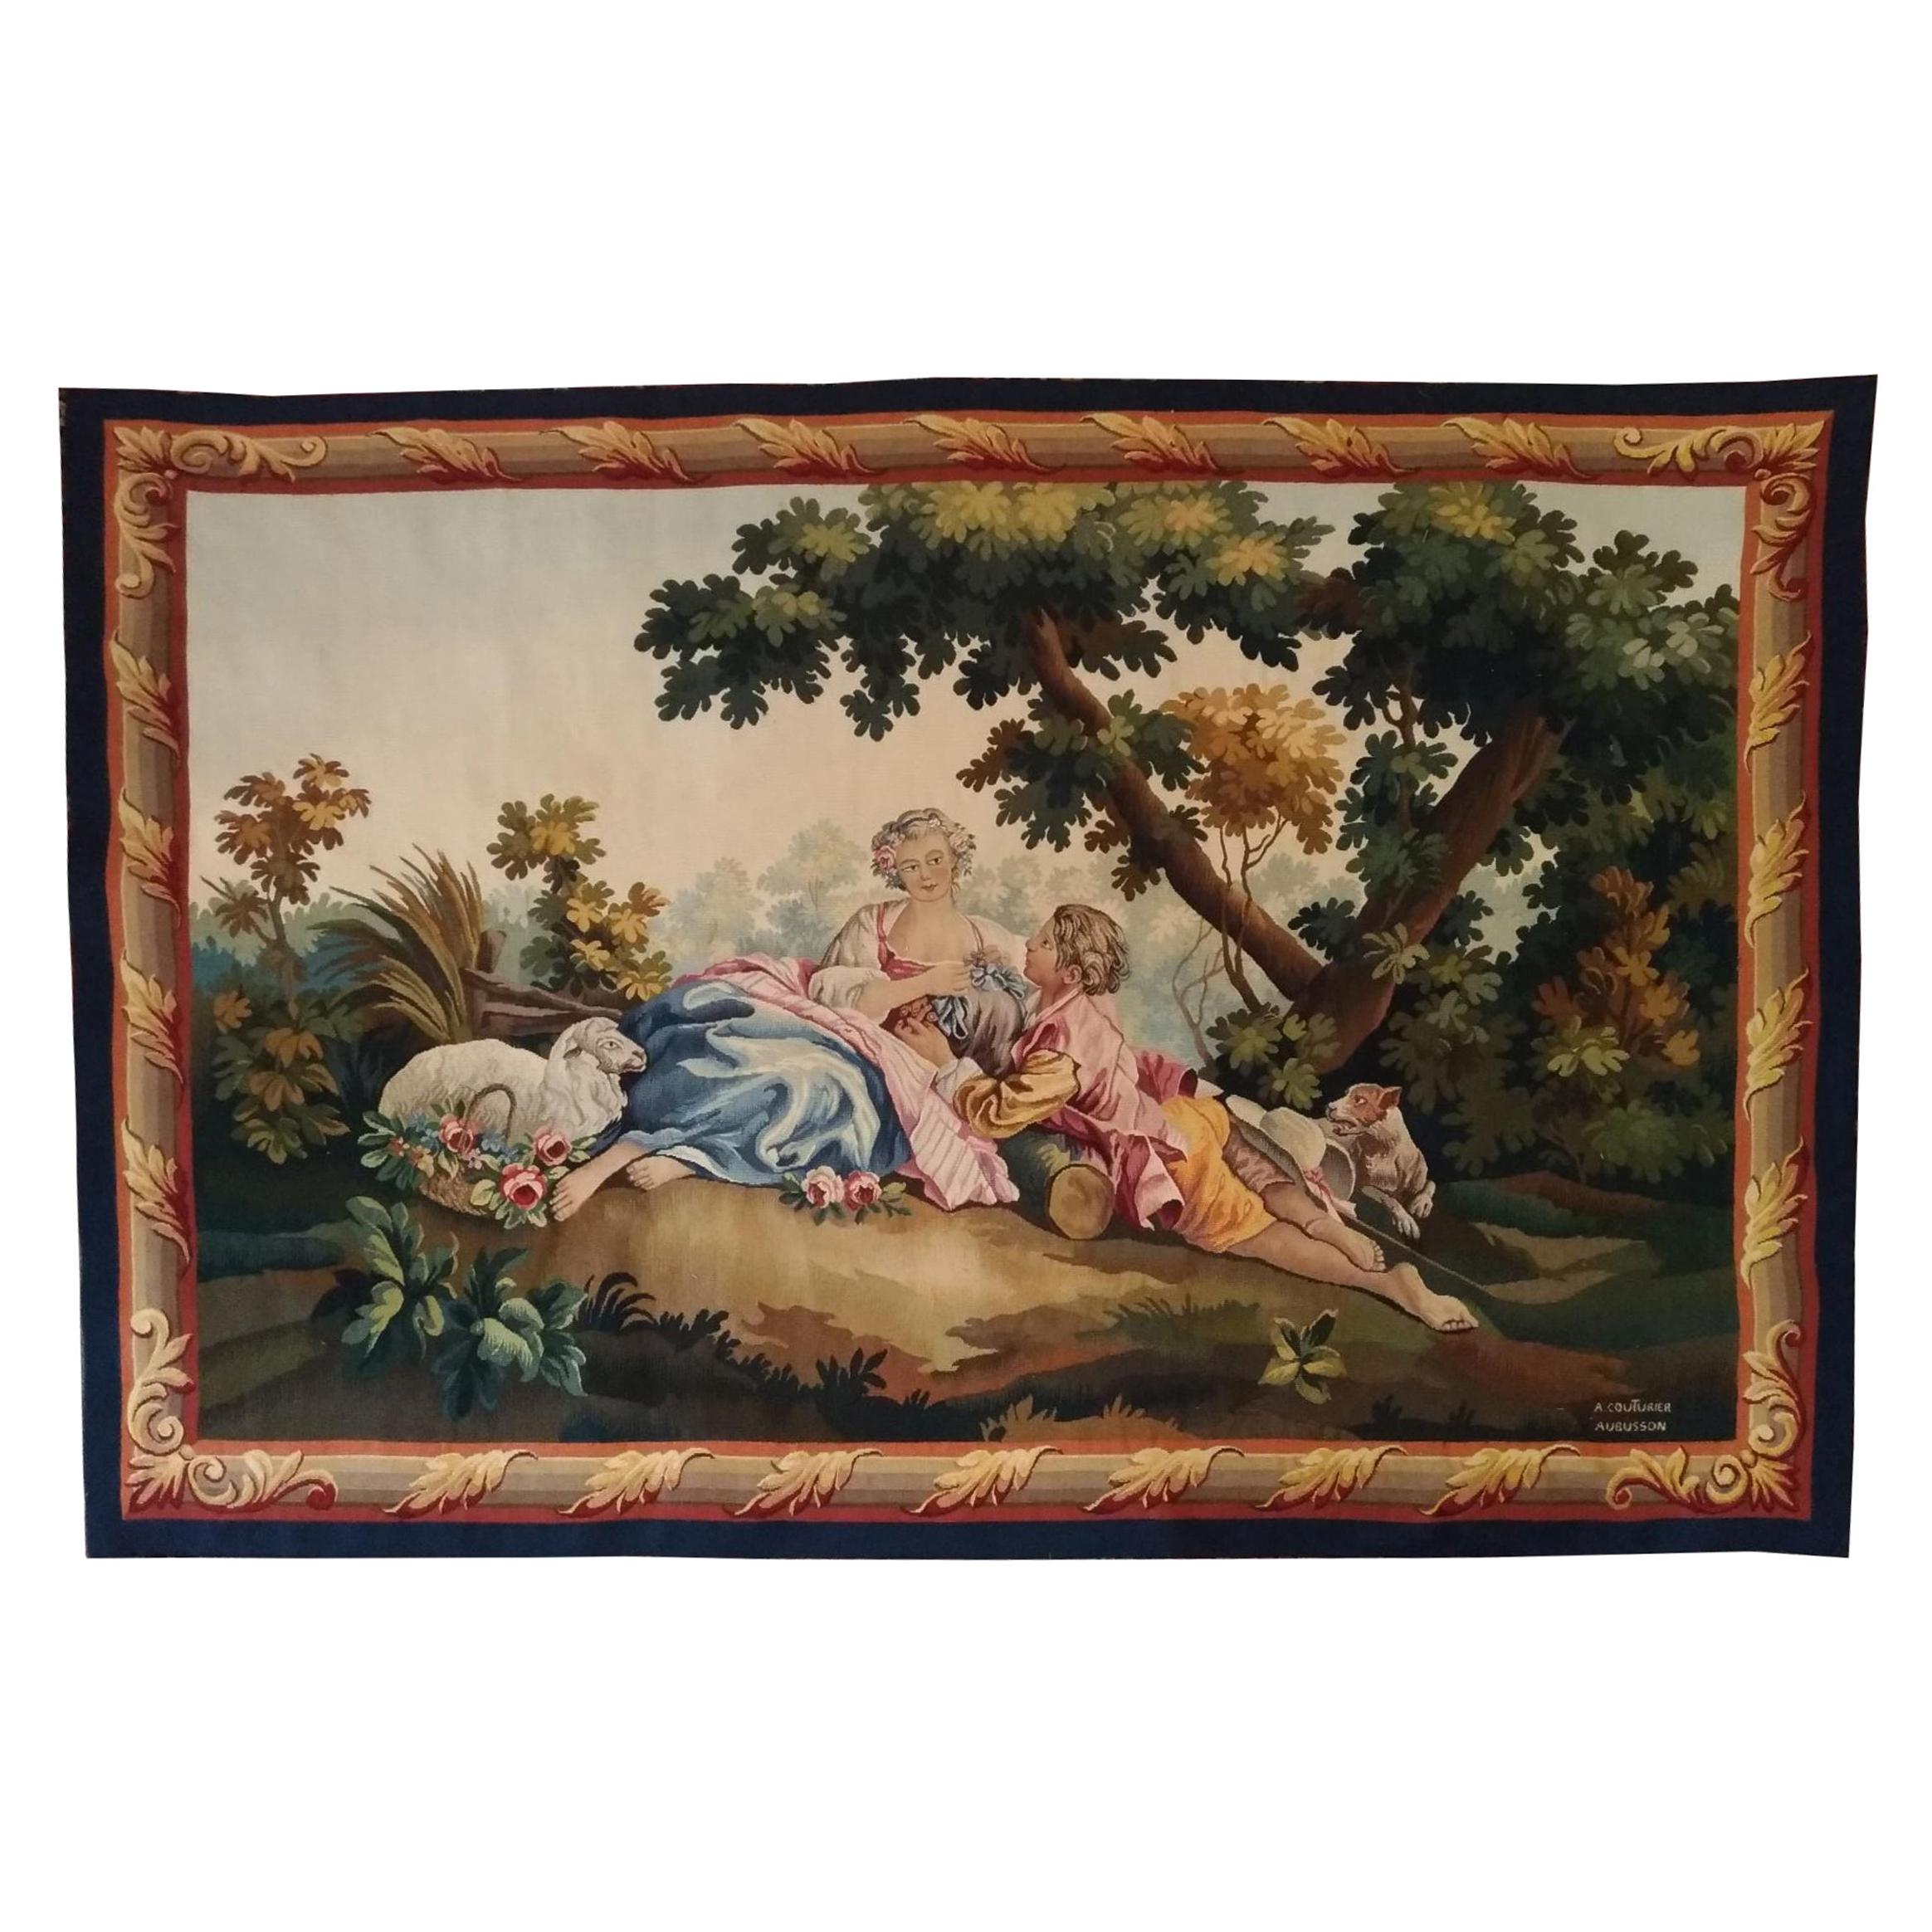 1041 - Luxurious French Aubusson Tapestry 19th Century Romantic Design